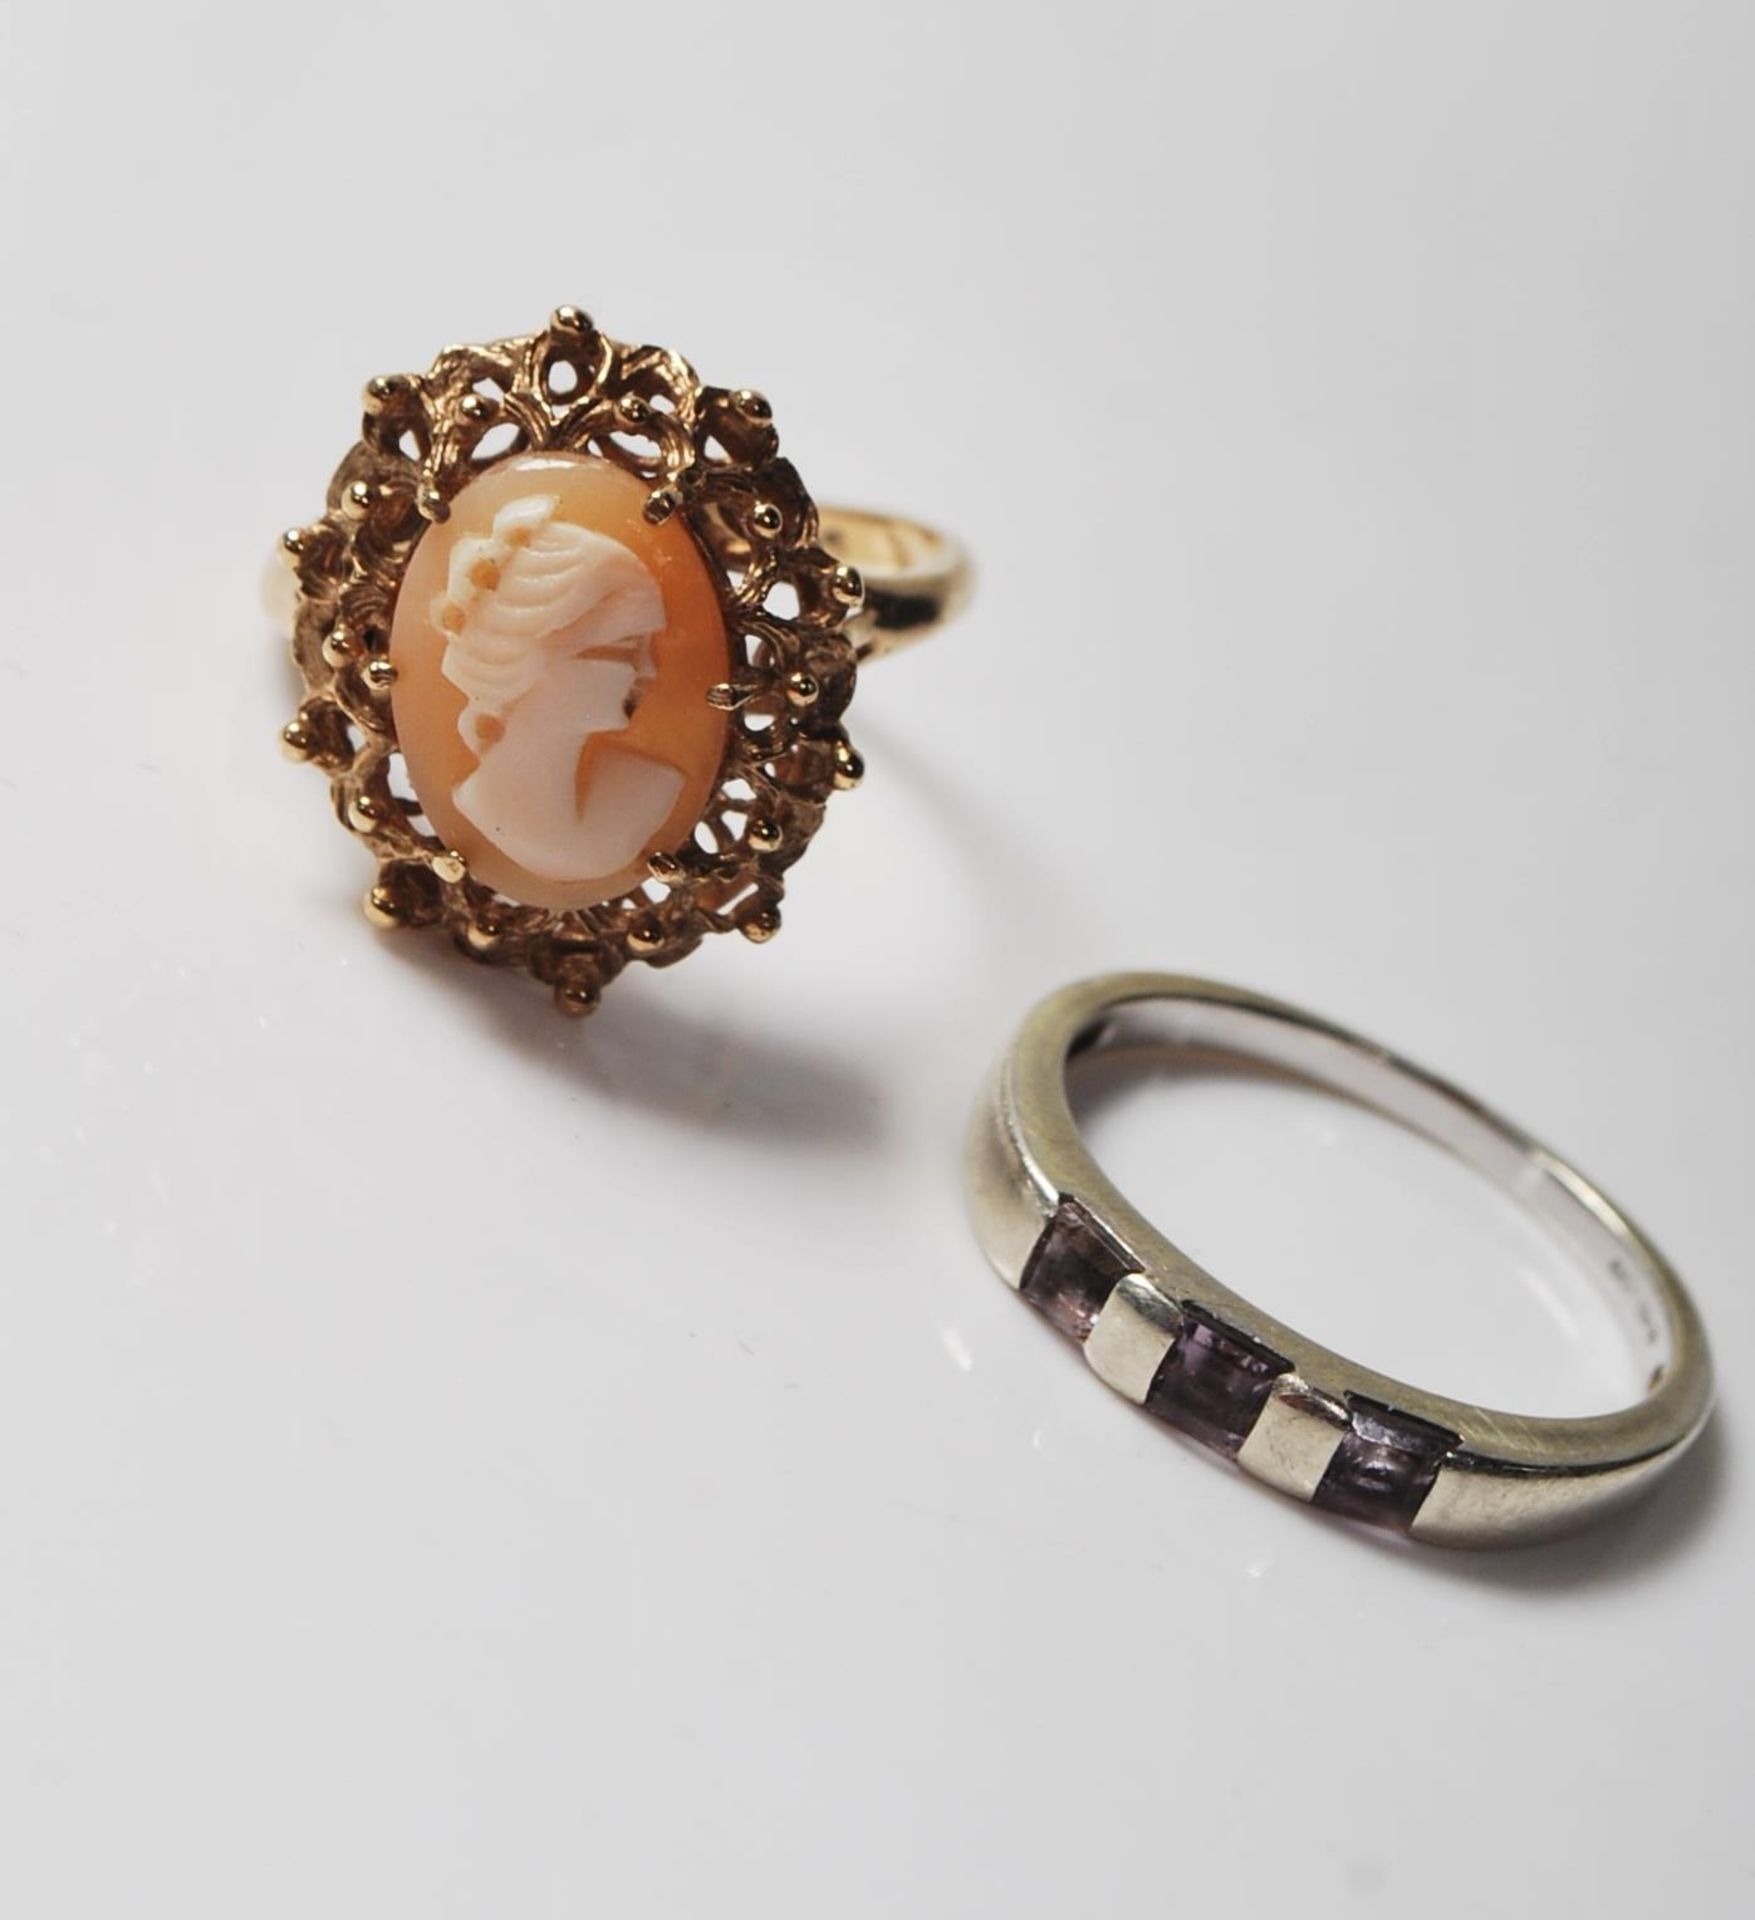 TWO 9CT GOLD RINGS. CAMEO RING - WHITE GOLD RING. - Image 3 of 7